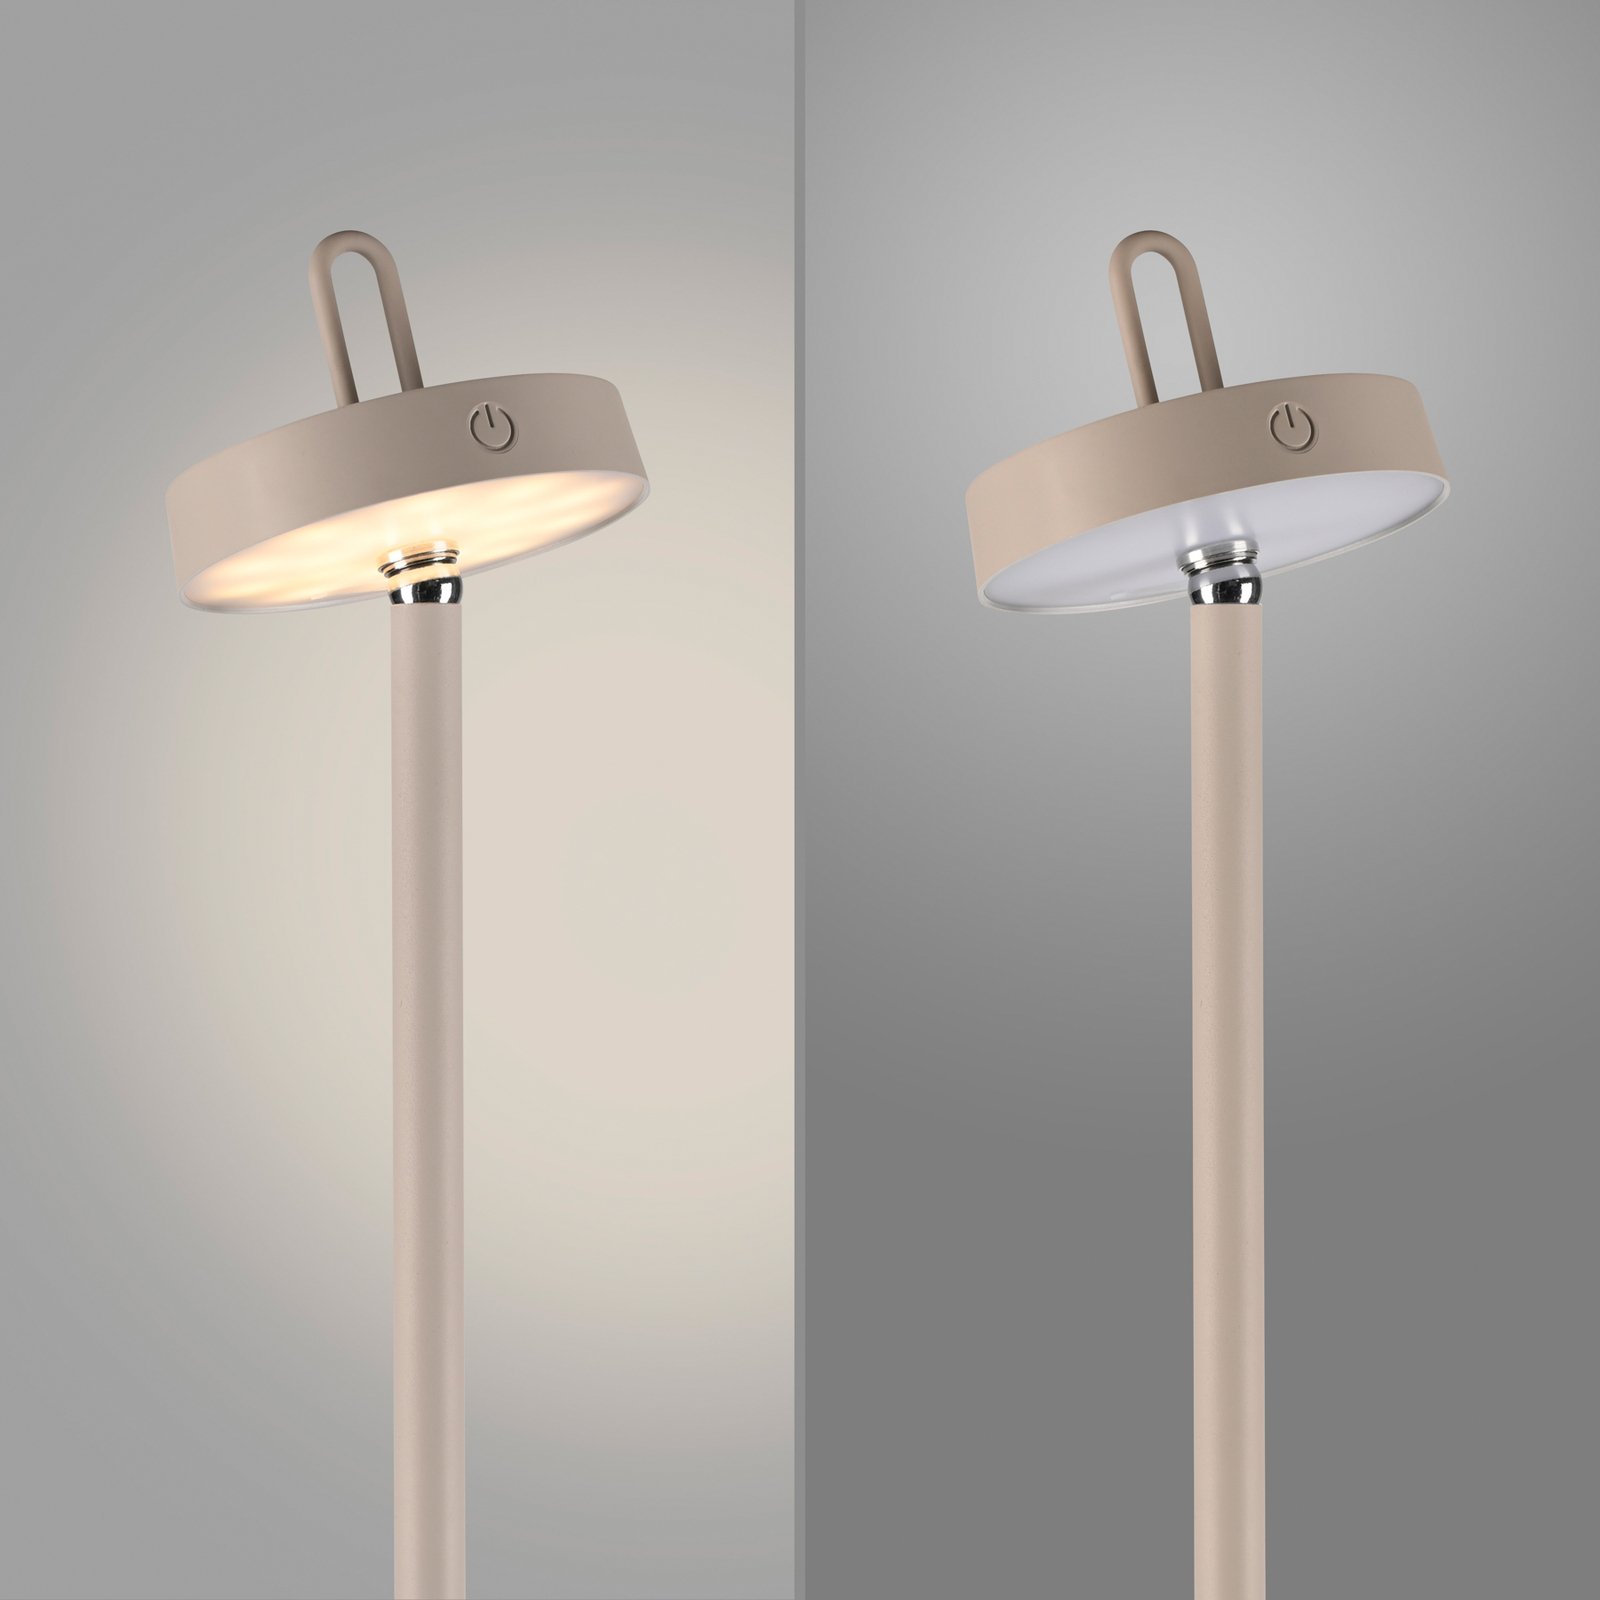 JUST LIGHT. Amag rechargeable LED floor lamp, grey-beige iron IP44